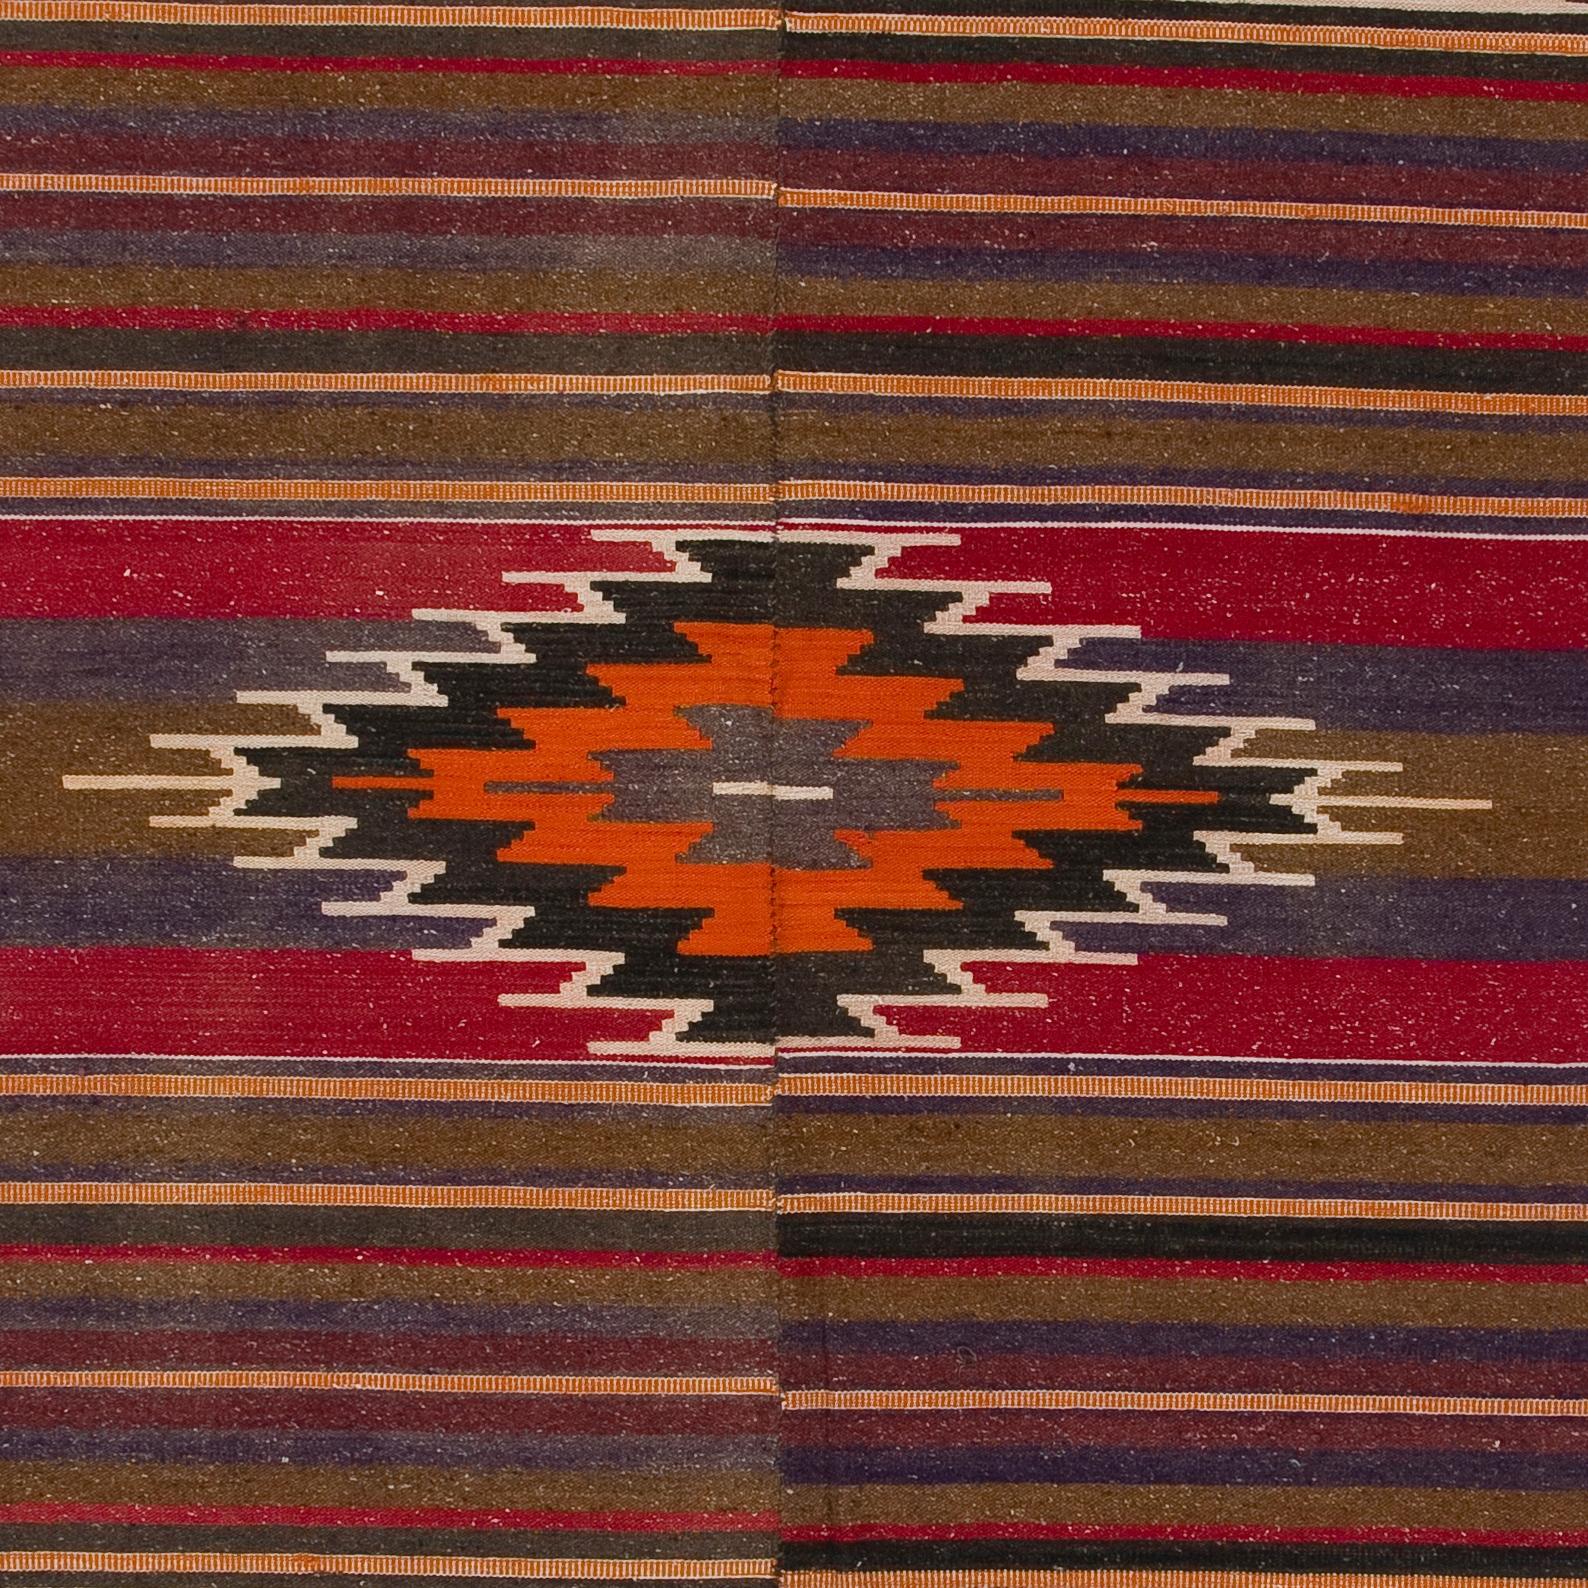 A simple yet beautiful wool rug handwoven by the Nomadic tribes in South Central Turkey. Very good condition, sturdy and clean. 100% wool. This Kilim is traditionally woven in two halves and connected in the center. 
Size: 4.4 x 9 ft.